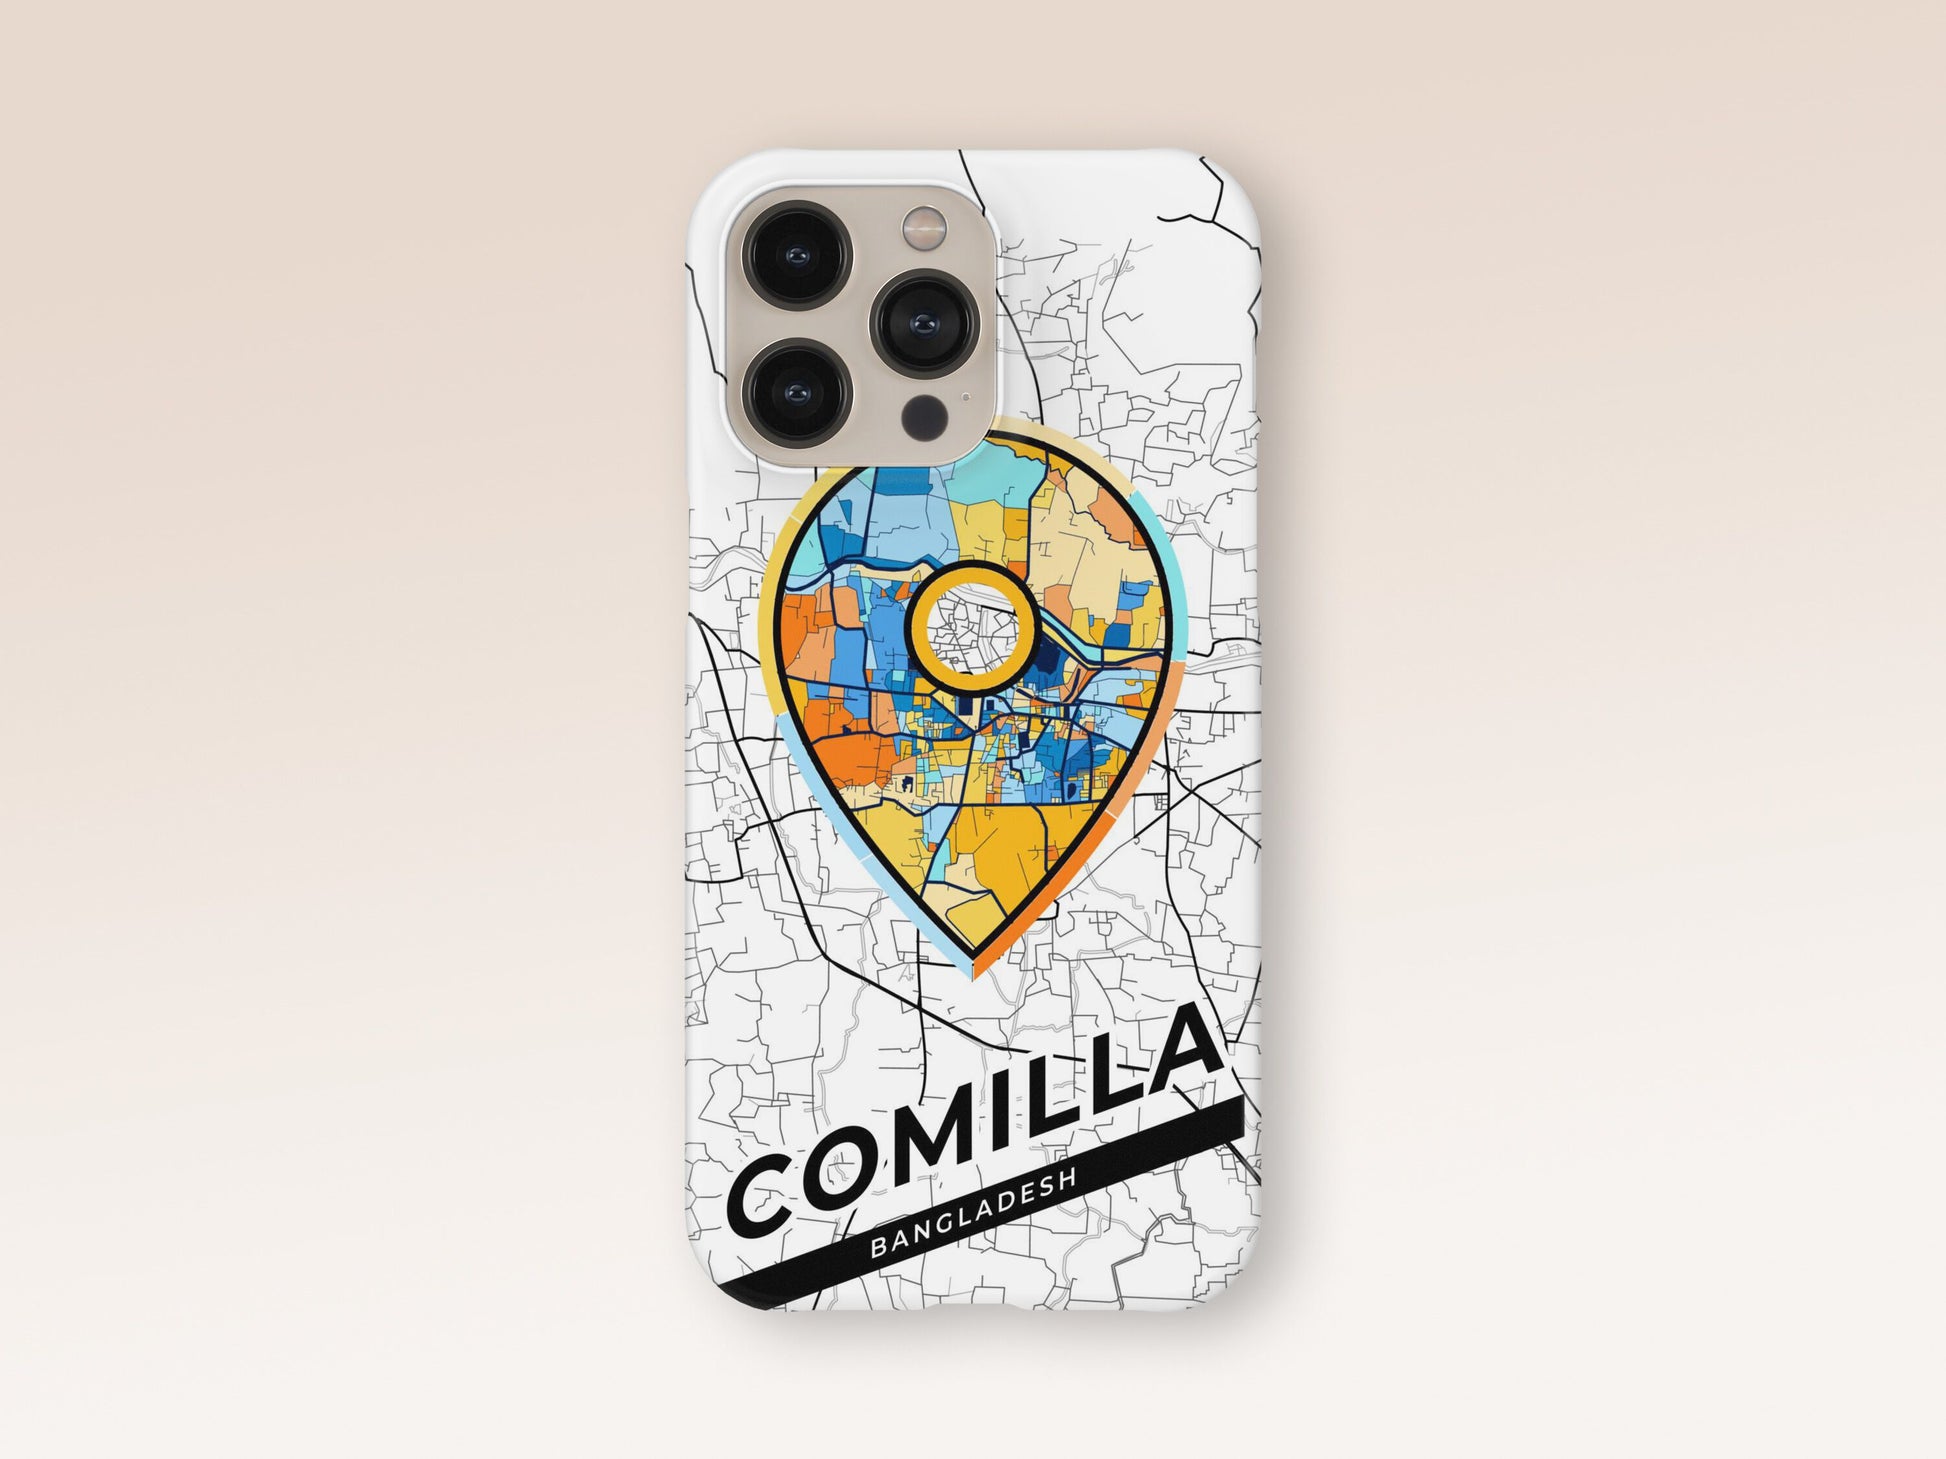 Comilla Bangladesh slim phone case with colorful icon. Birthday, wedding or housewarming gift. Couple match cases. 1